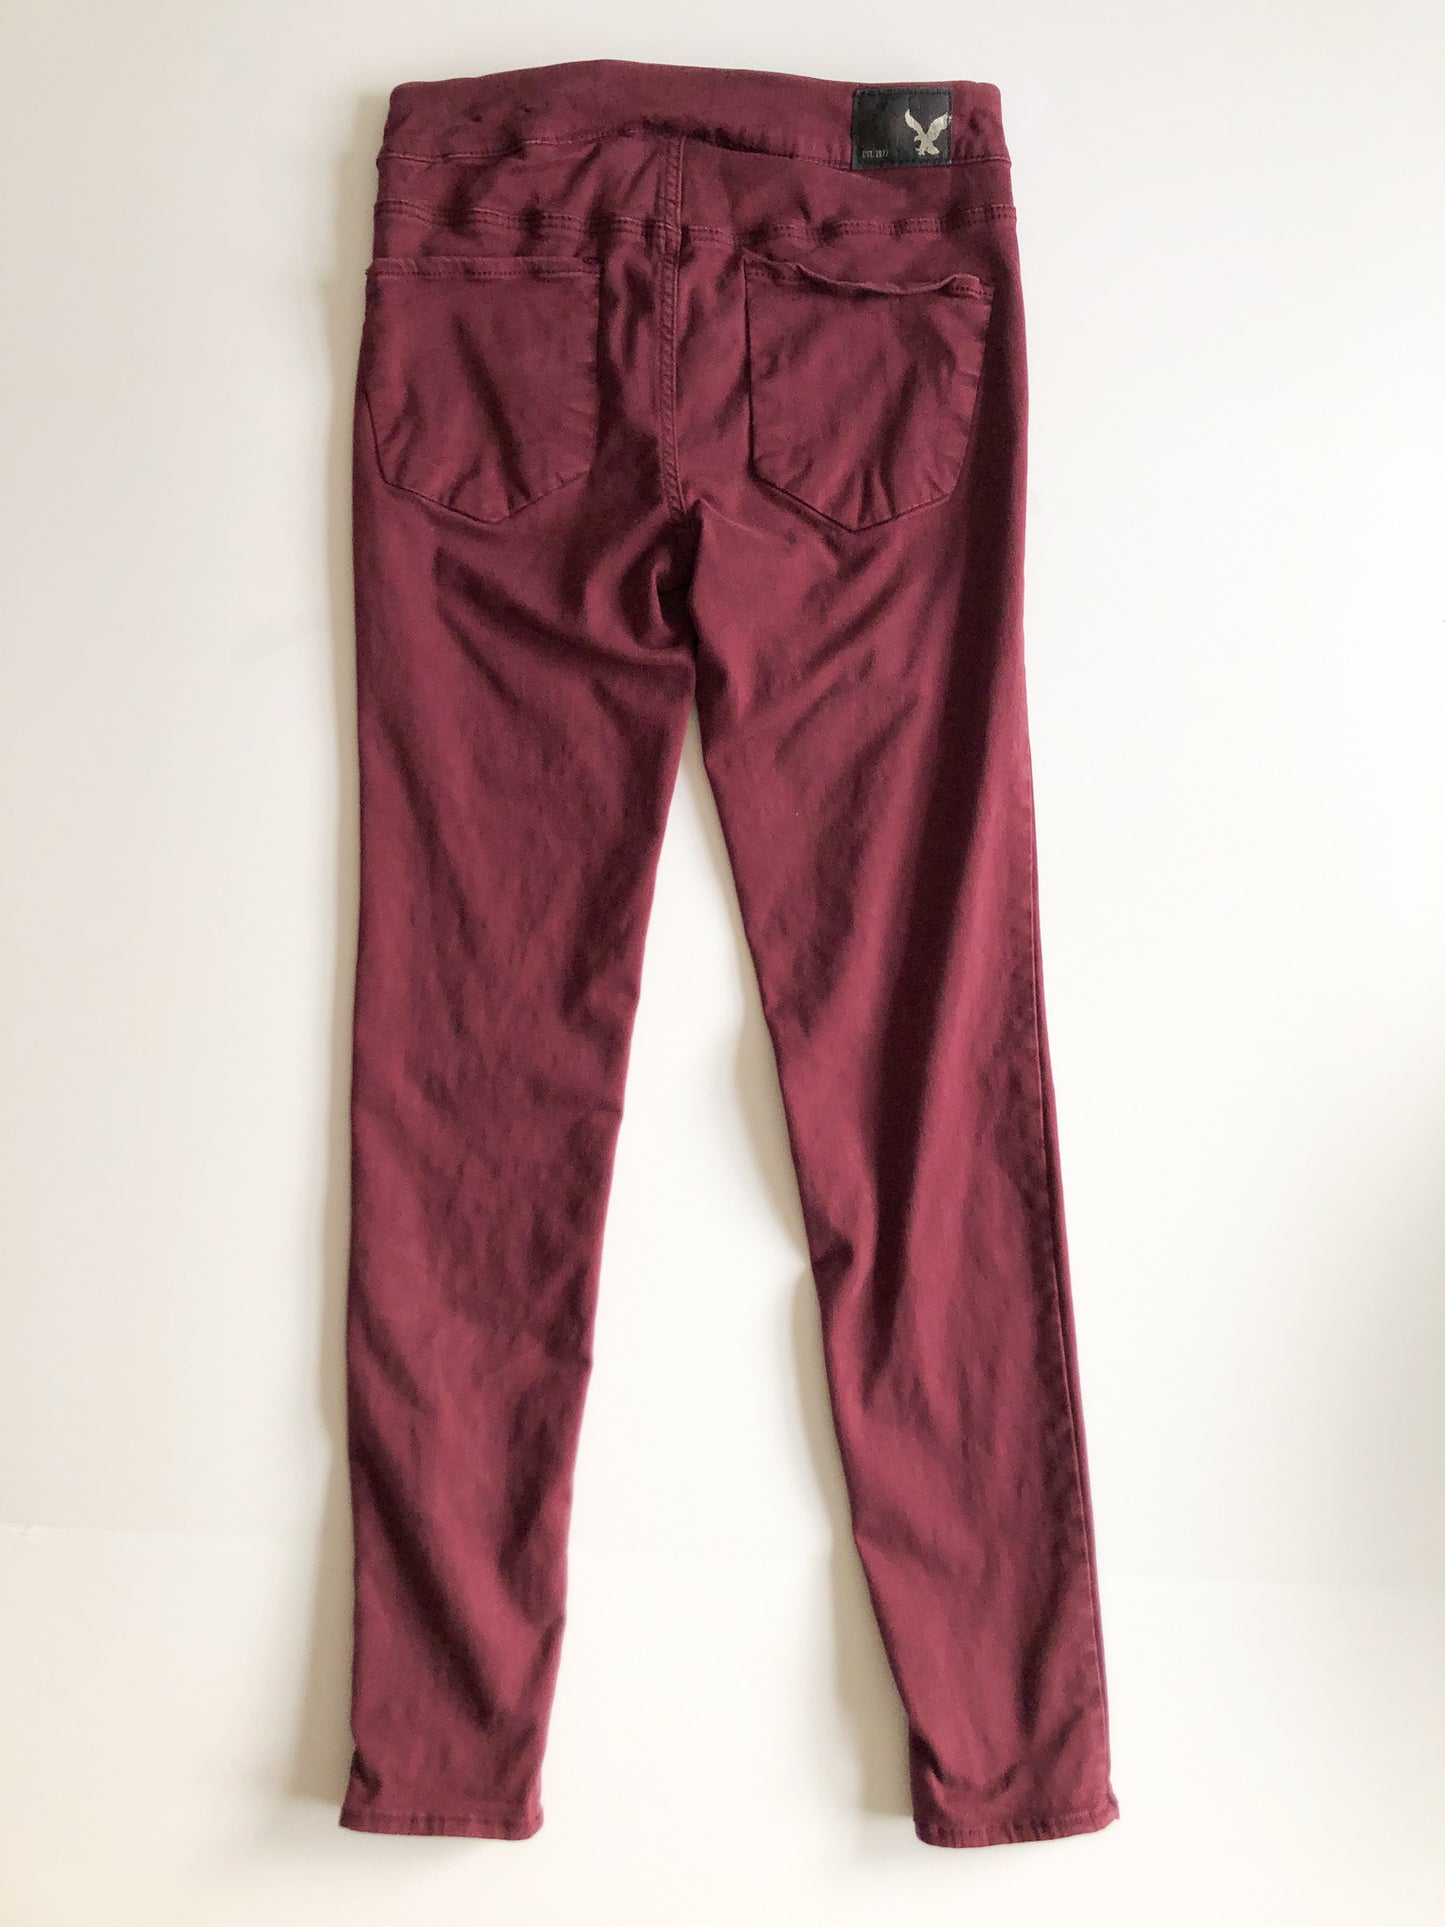 American Eagle Extreme Legging Highest Rise Wine Deep Red Jeggings - Size 0